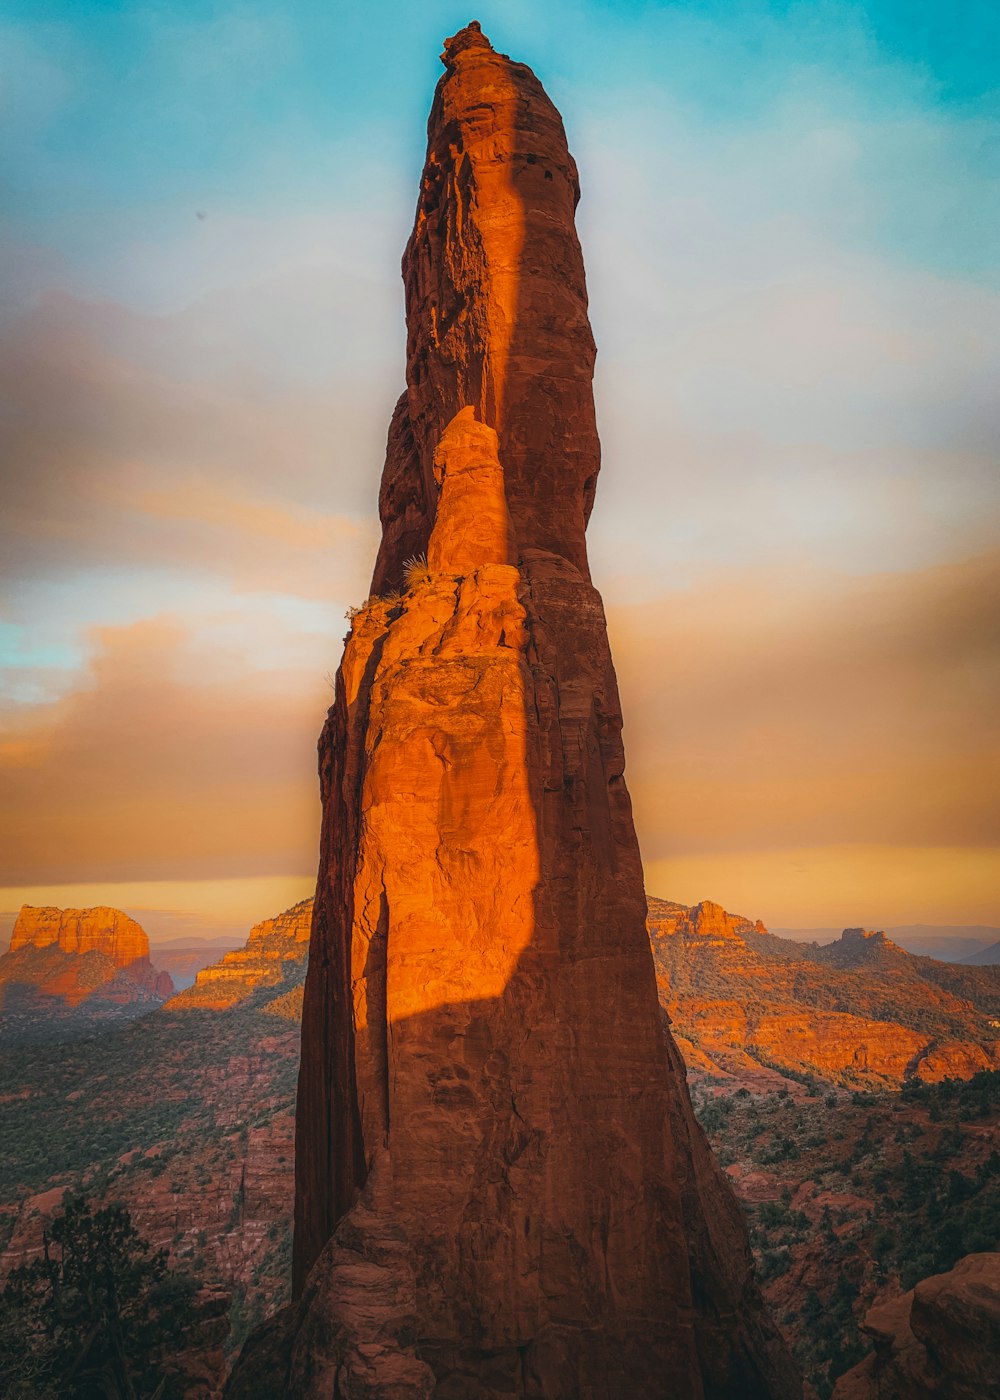 a tall rock formation in the middle of a desert